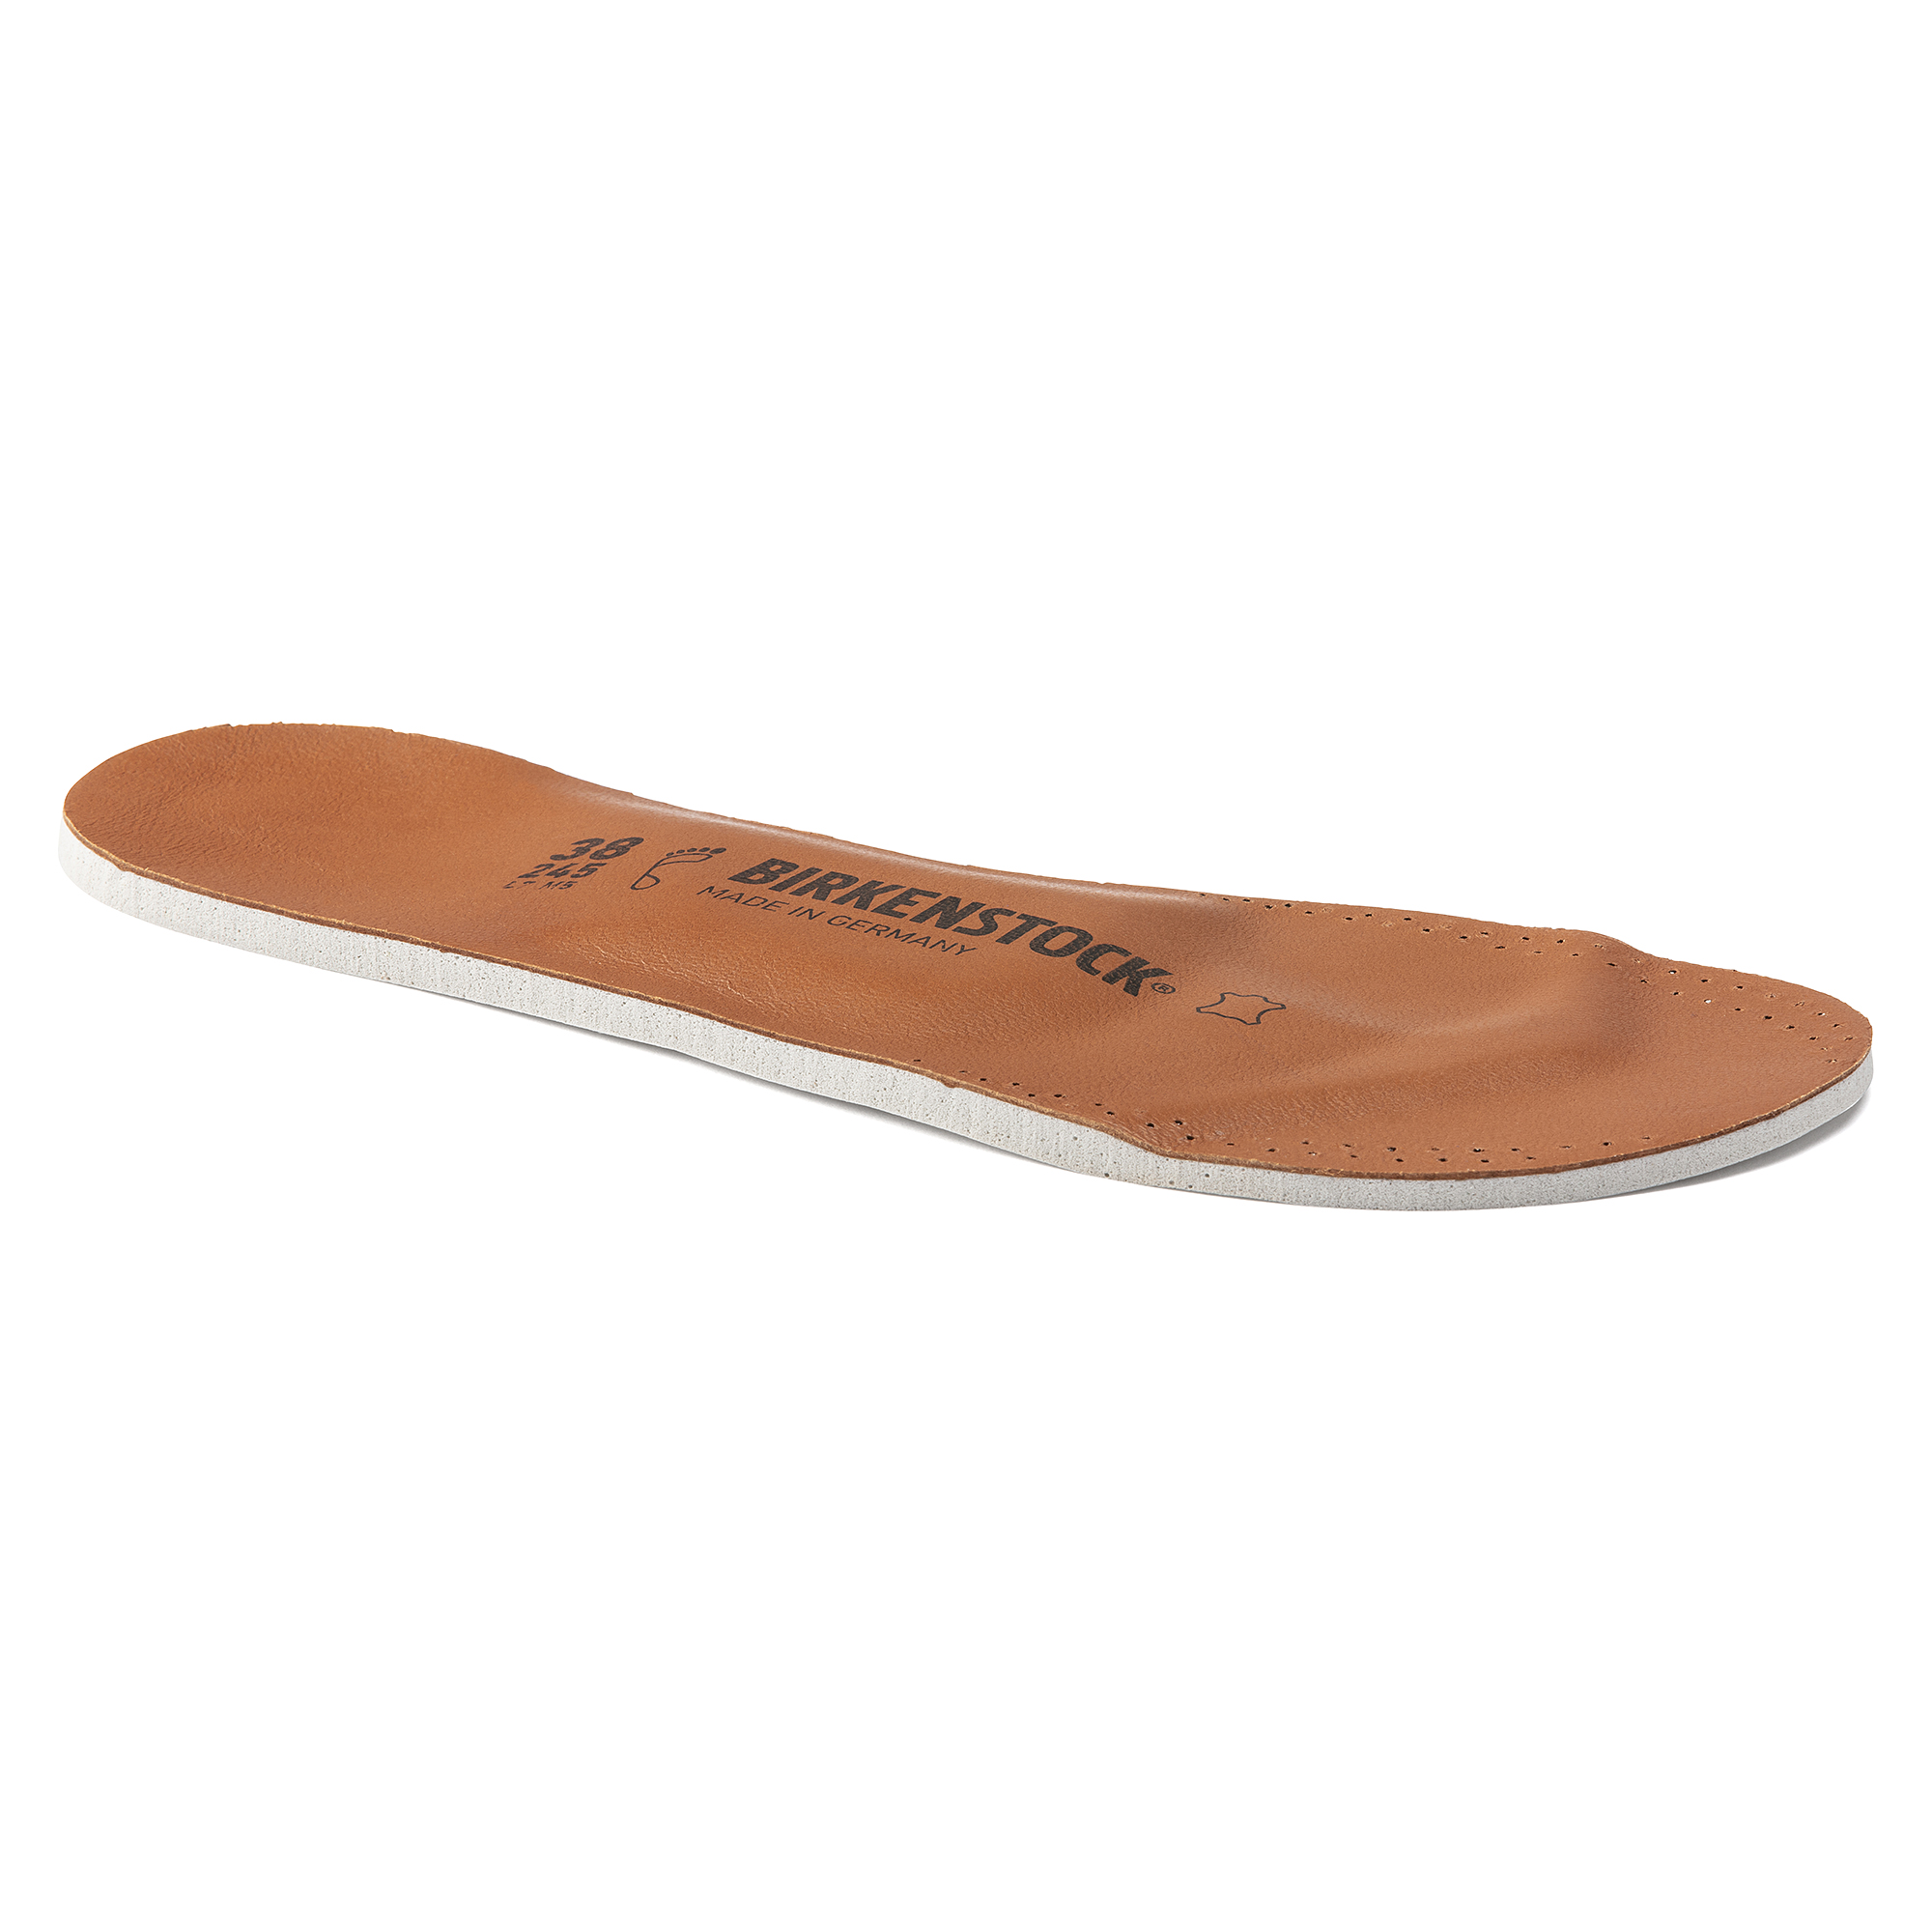 Full Leather Insole Brown | shop online 